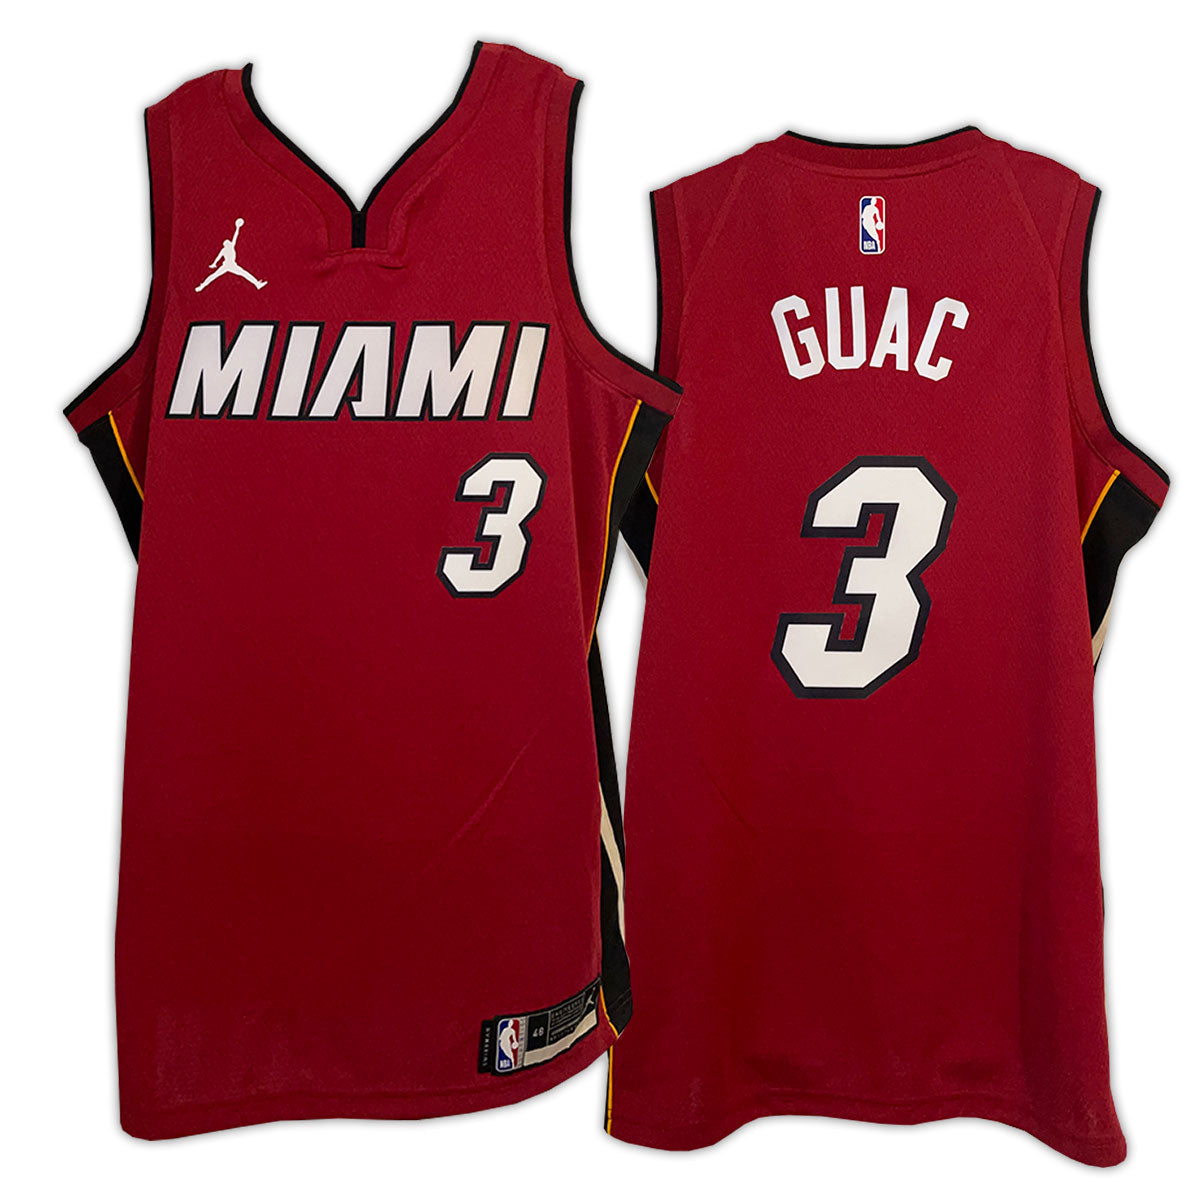 ONE OF A KIND NBA OFFICIAL GUAC #0 NIKE MIAMI HEAT MASHUP